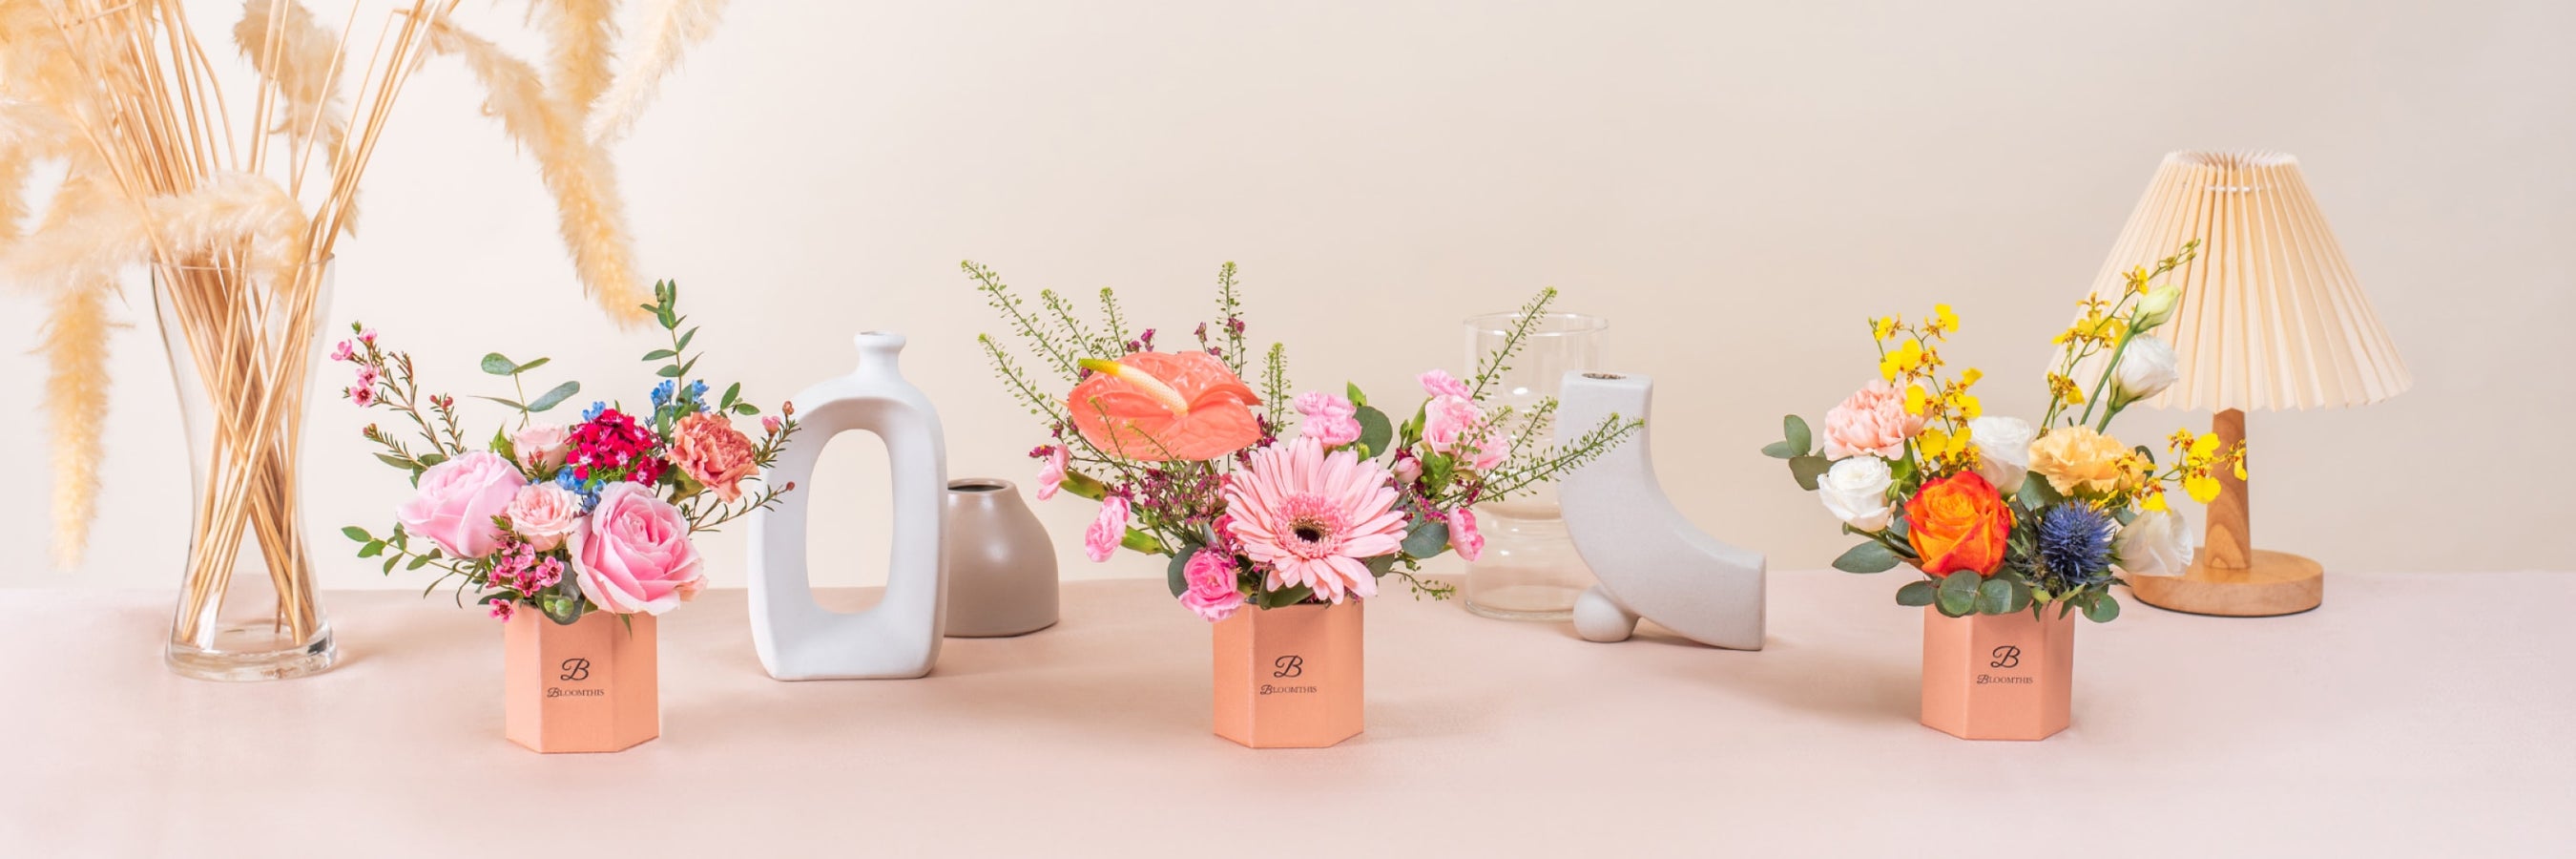 BloomThis Teacher's Day Gifts & Flowers